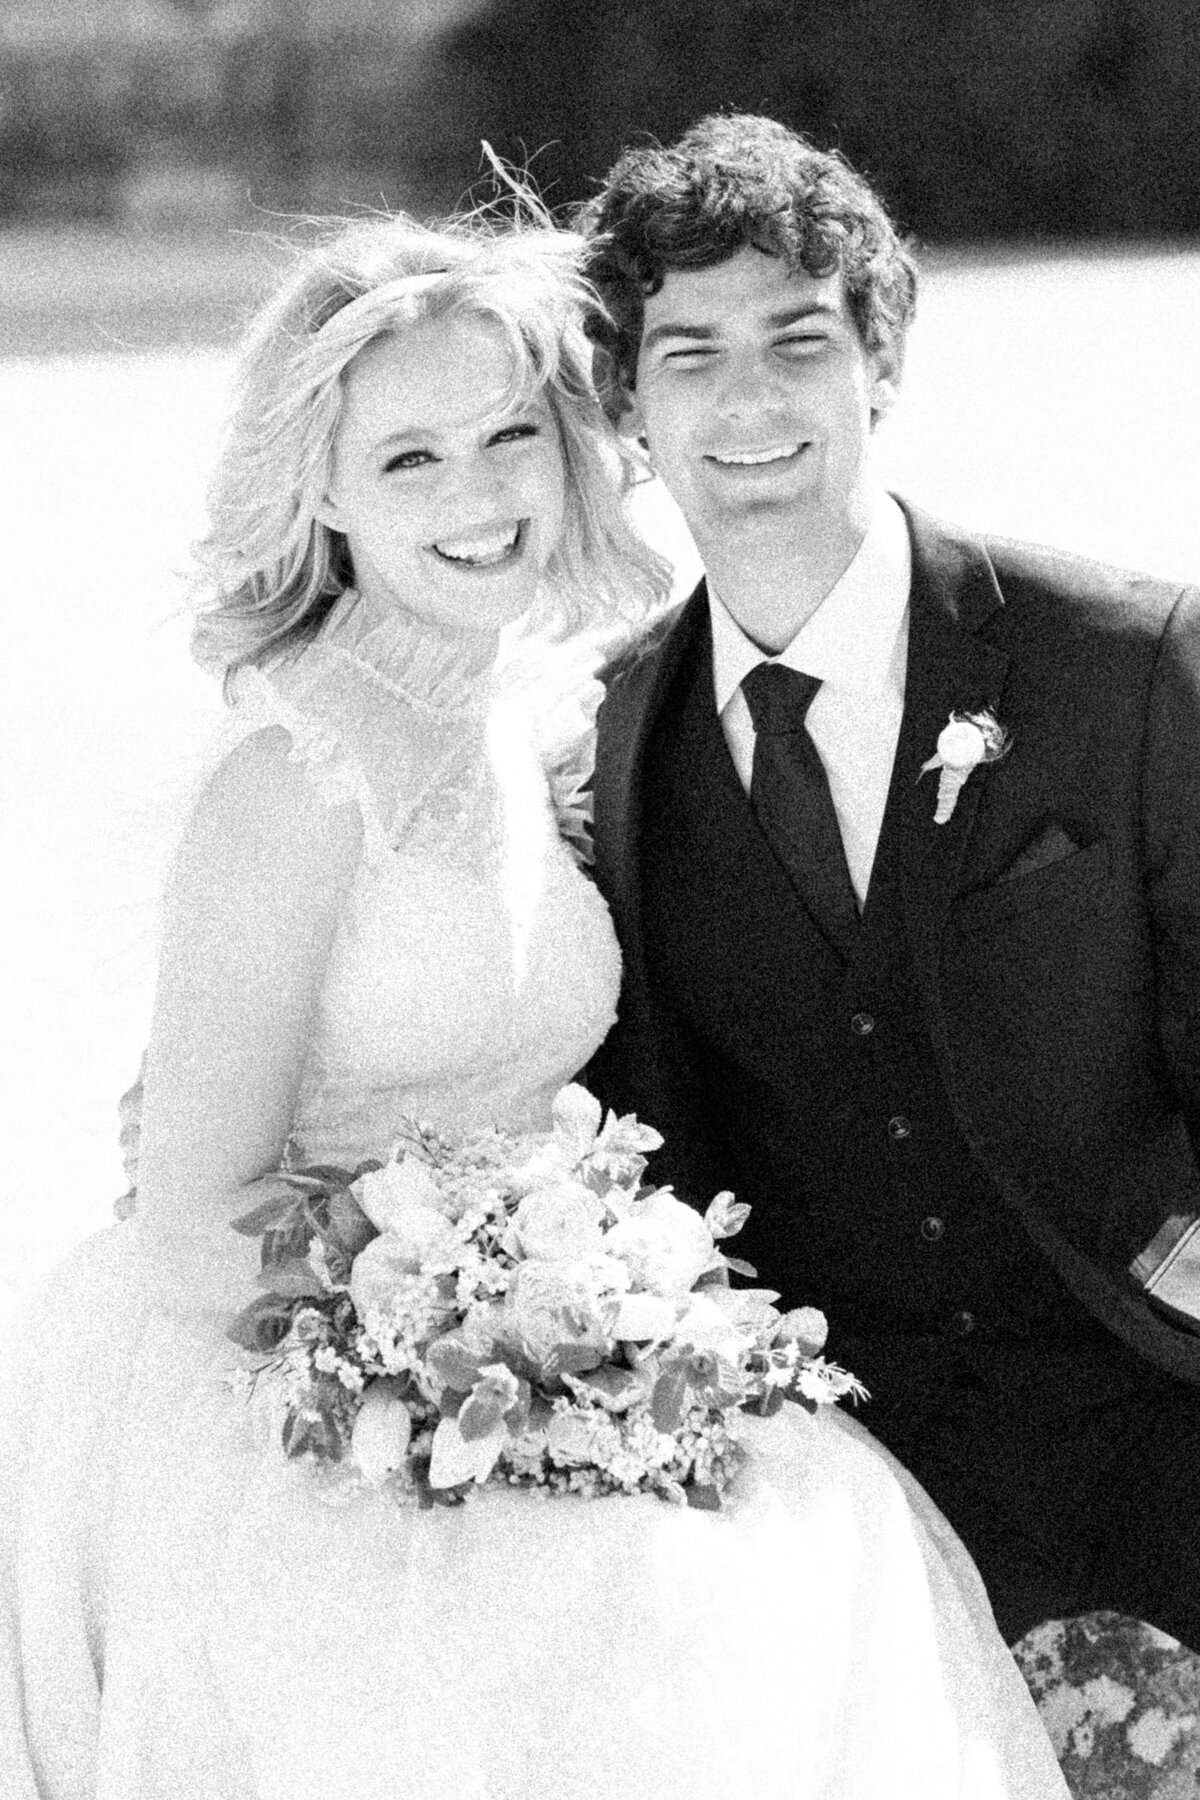 black and white image of a bride and groom sitting together and laughing